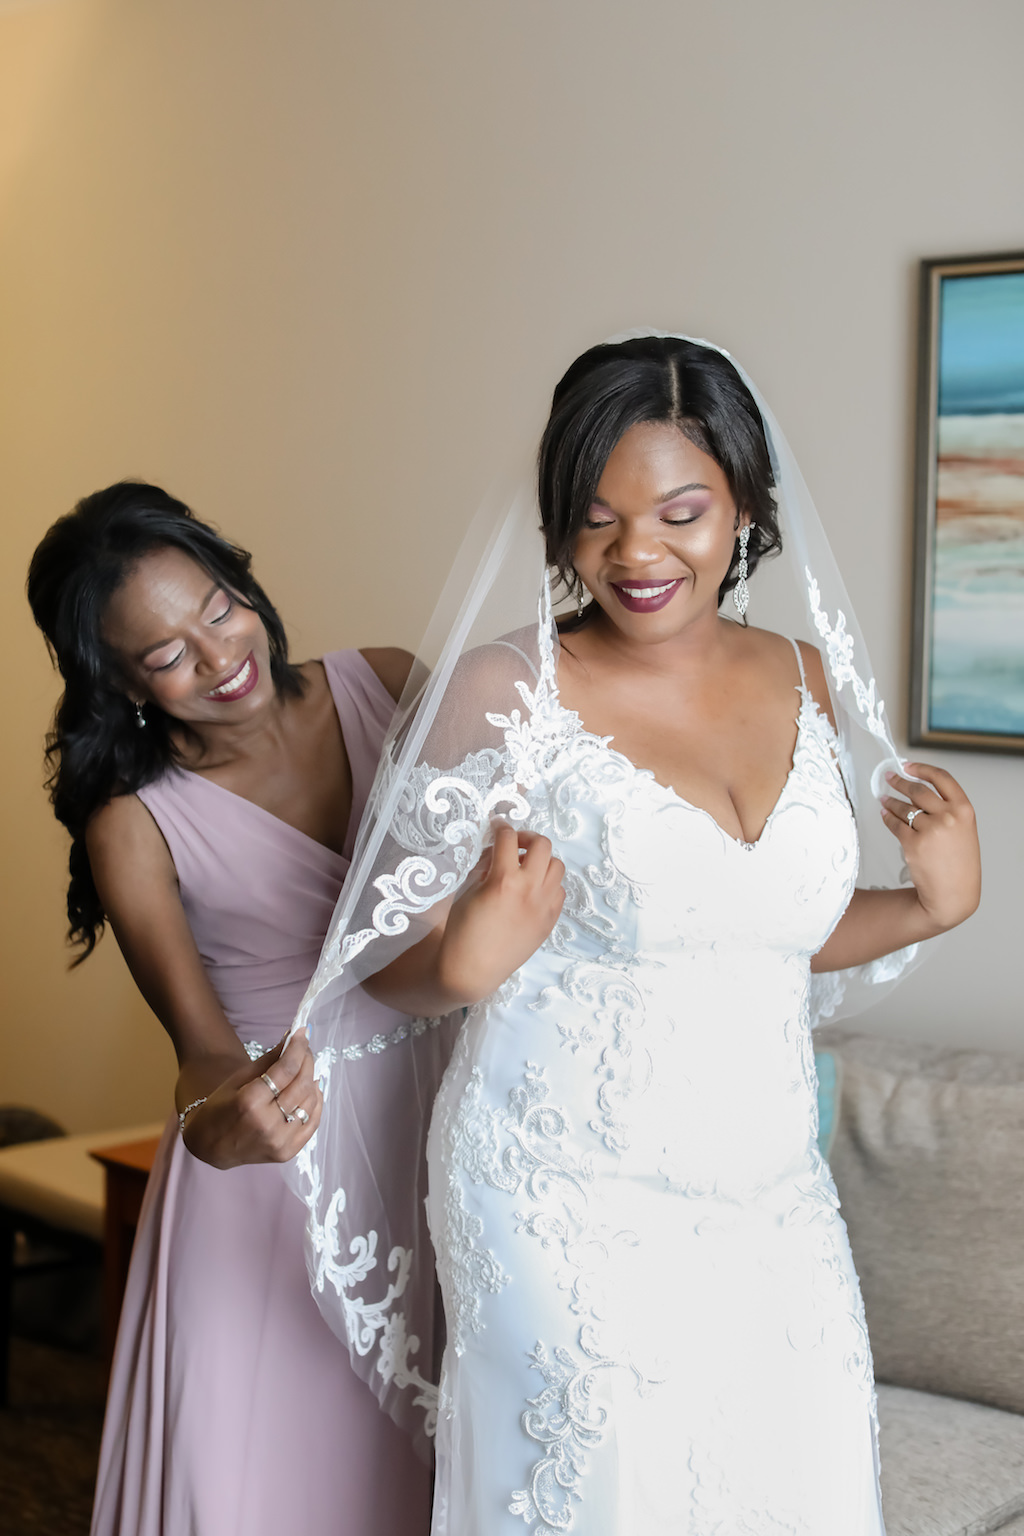 Bride Getting Ready Wedding Portrait in Fitted Lace V Neck Off the Shoulders Wedding Dress and Classic Veil with Bridesmaids in Mauve Dress | Tampa Wedding Photographer Lifelong Photography Studio | Wedding Hair and Makeup Michele Renee the Studio | Wedding Dress Boutique Truly Forever Bridal